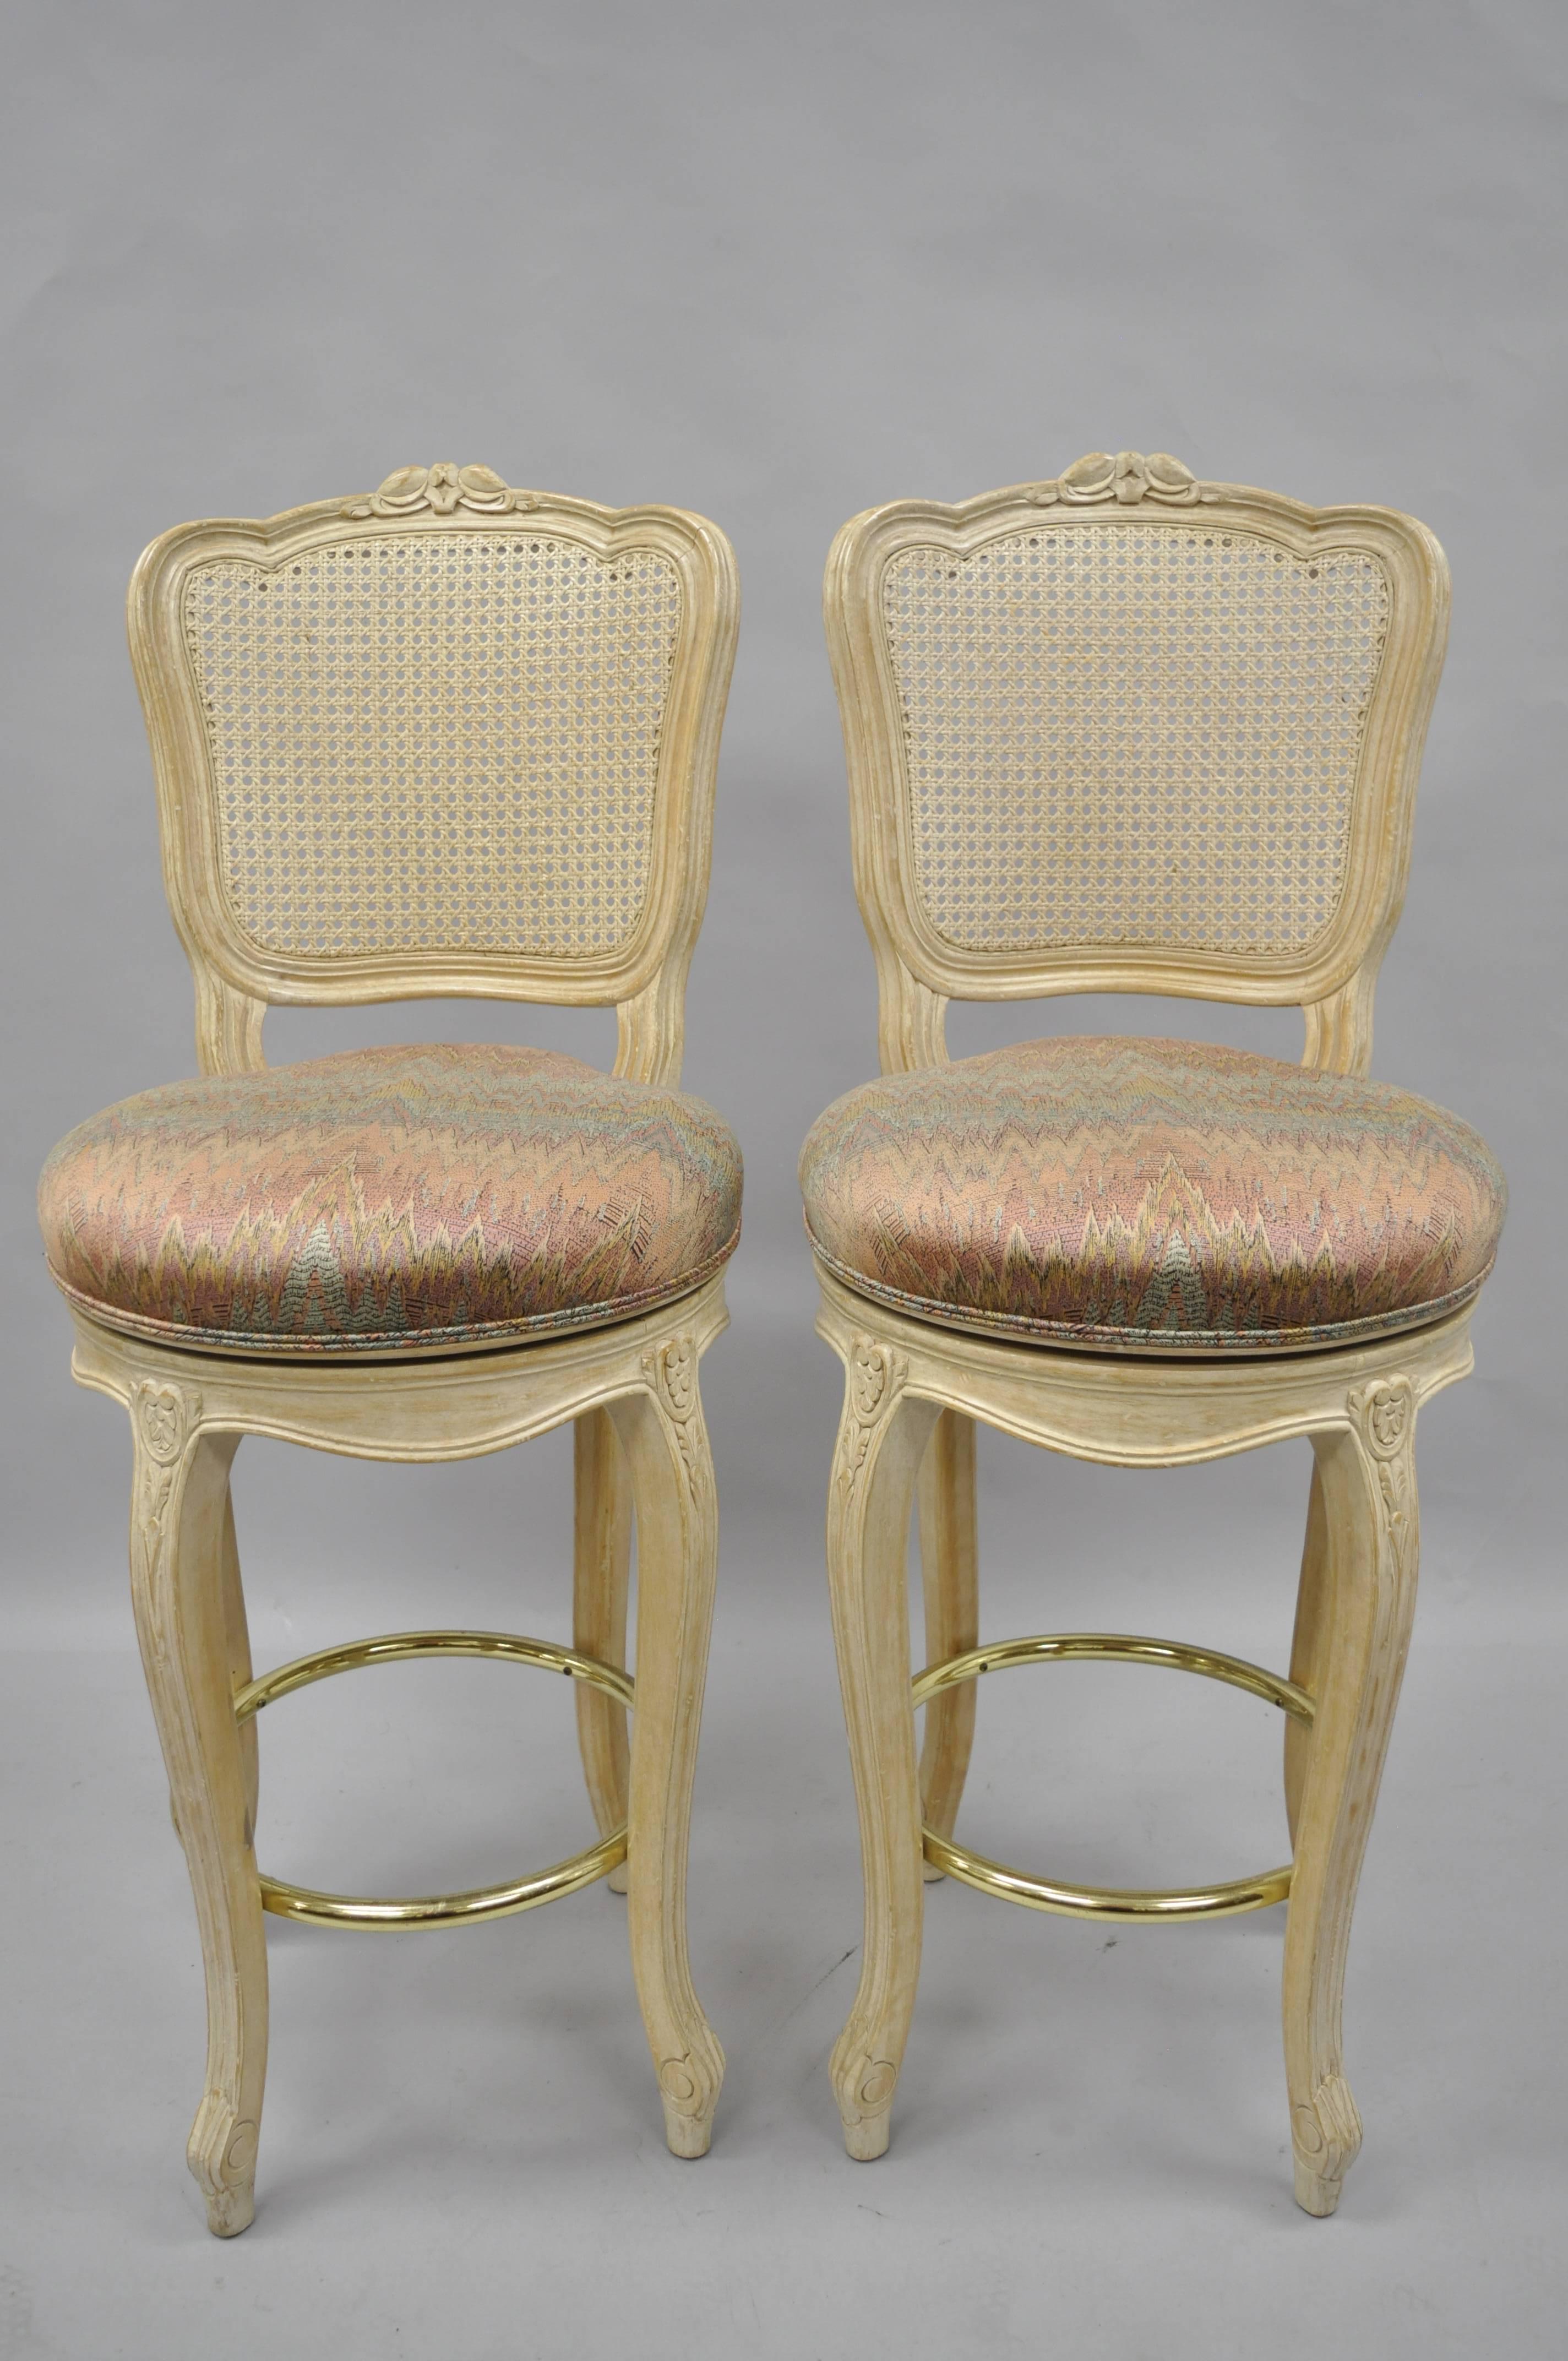 Pair of vintage French country Louis XV style cane back swivel bar stools. Stools feature solid carved wood frames, upholstered swivel seats, cane backs, cabriole legs, white washed distressed finish, brass footrest, classic French